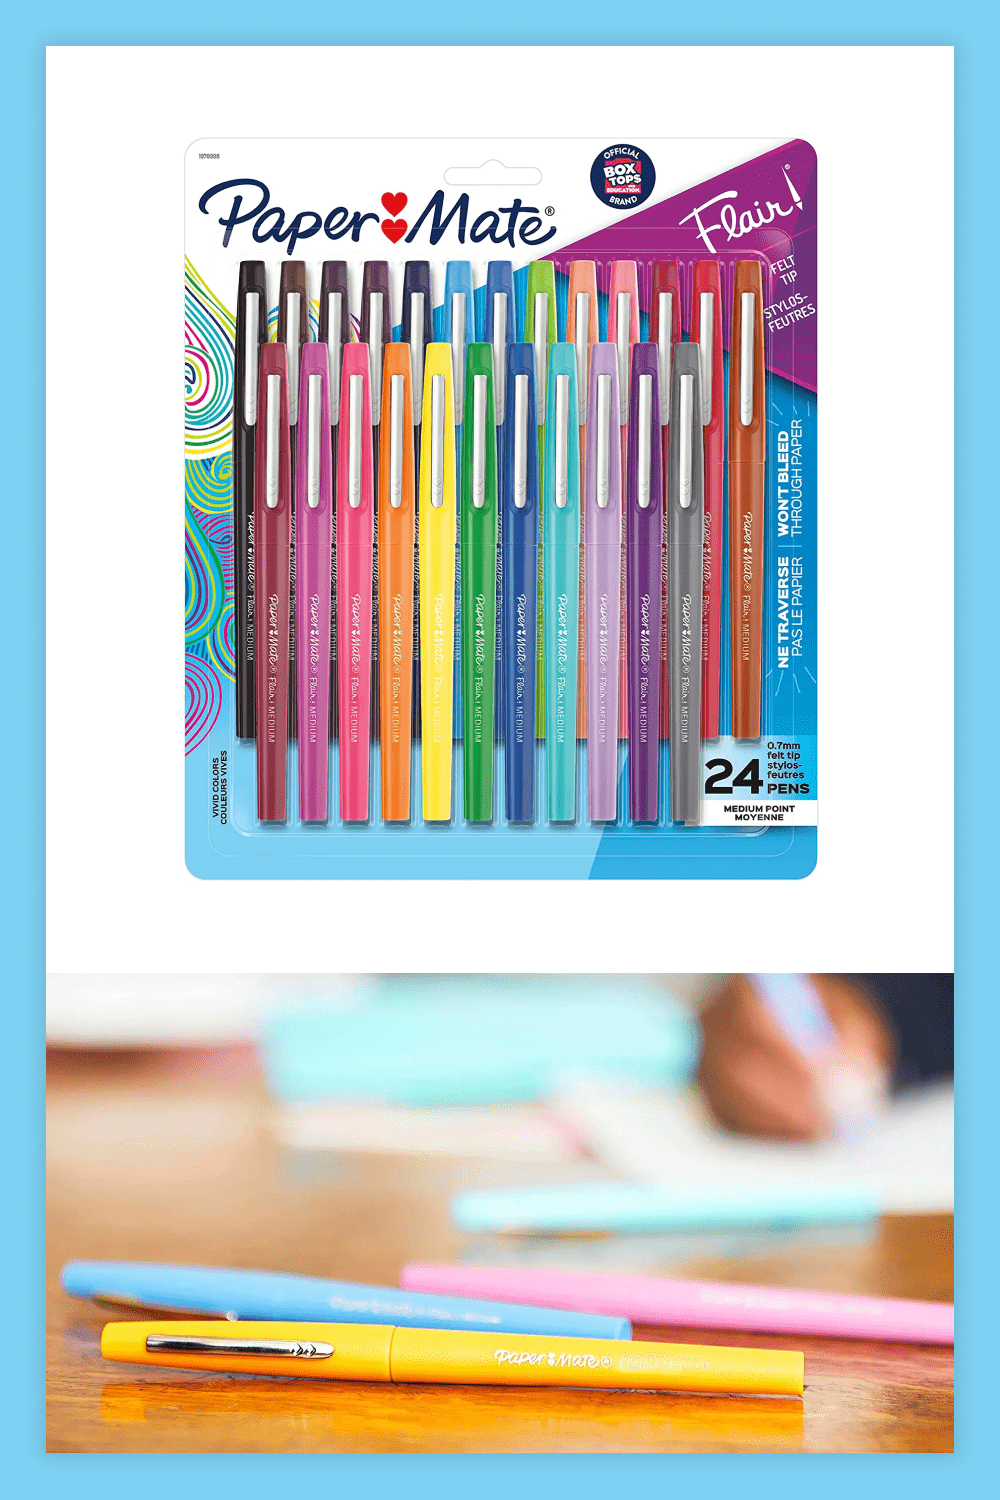  Mr. Pen- Felt Tip Pens, Pens Fine Point, Pack of 8, Fast Dry,  No Smear, Colored Pens, Journaling Pens, Felt Pens, Planner Markers, Planner  Pens, Christmas Gift : Office Products